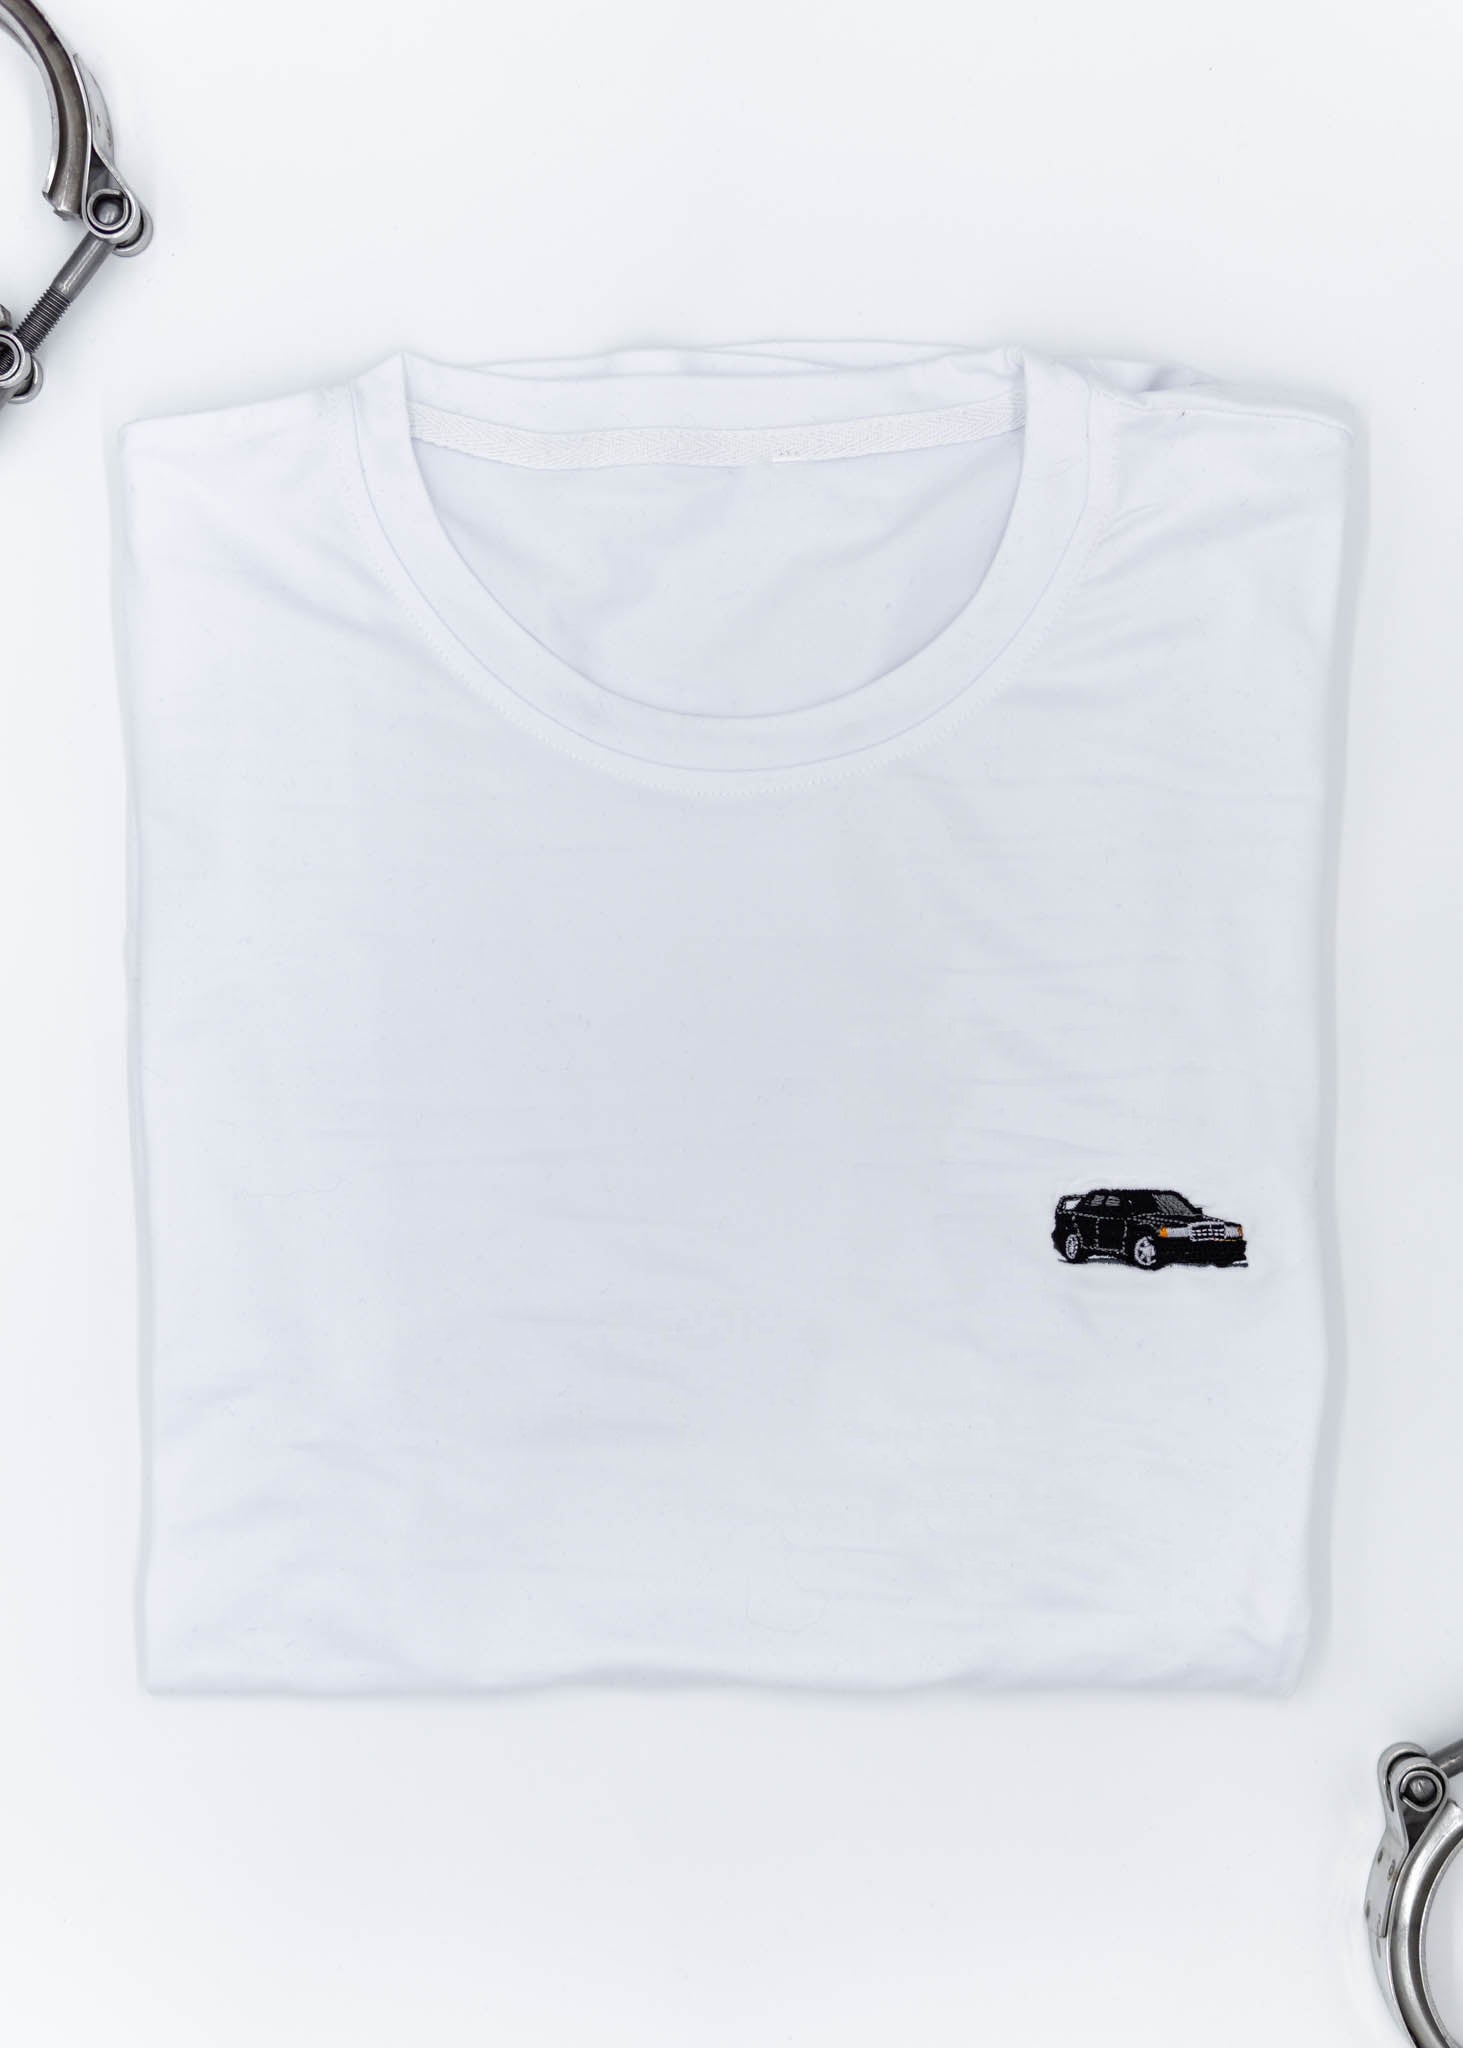 A white Mercedes-Benz t-shirt for men. Photo is a close up view of the shirt with an embroidered black W201 190E 2.5-16 Evo II. Fabric composition is a polyester, and cotton mix. The material is very soft, stretchy, non-transparent. The style of this shirt is short sleeve, with a crewneck neckline.